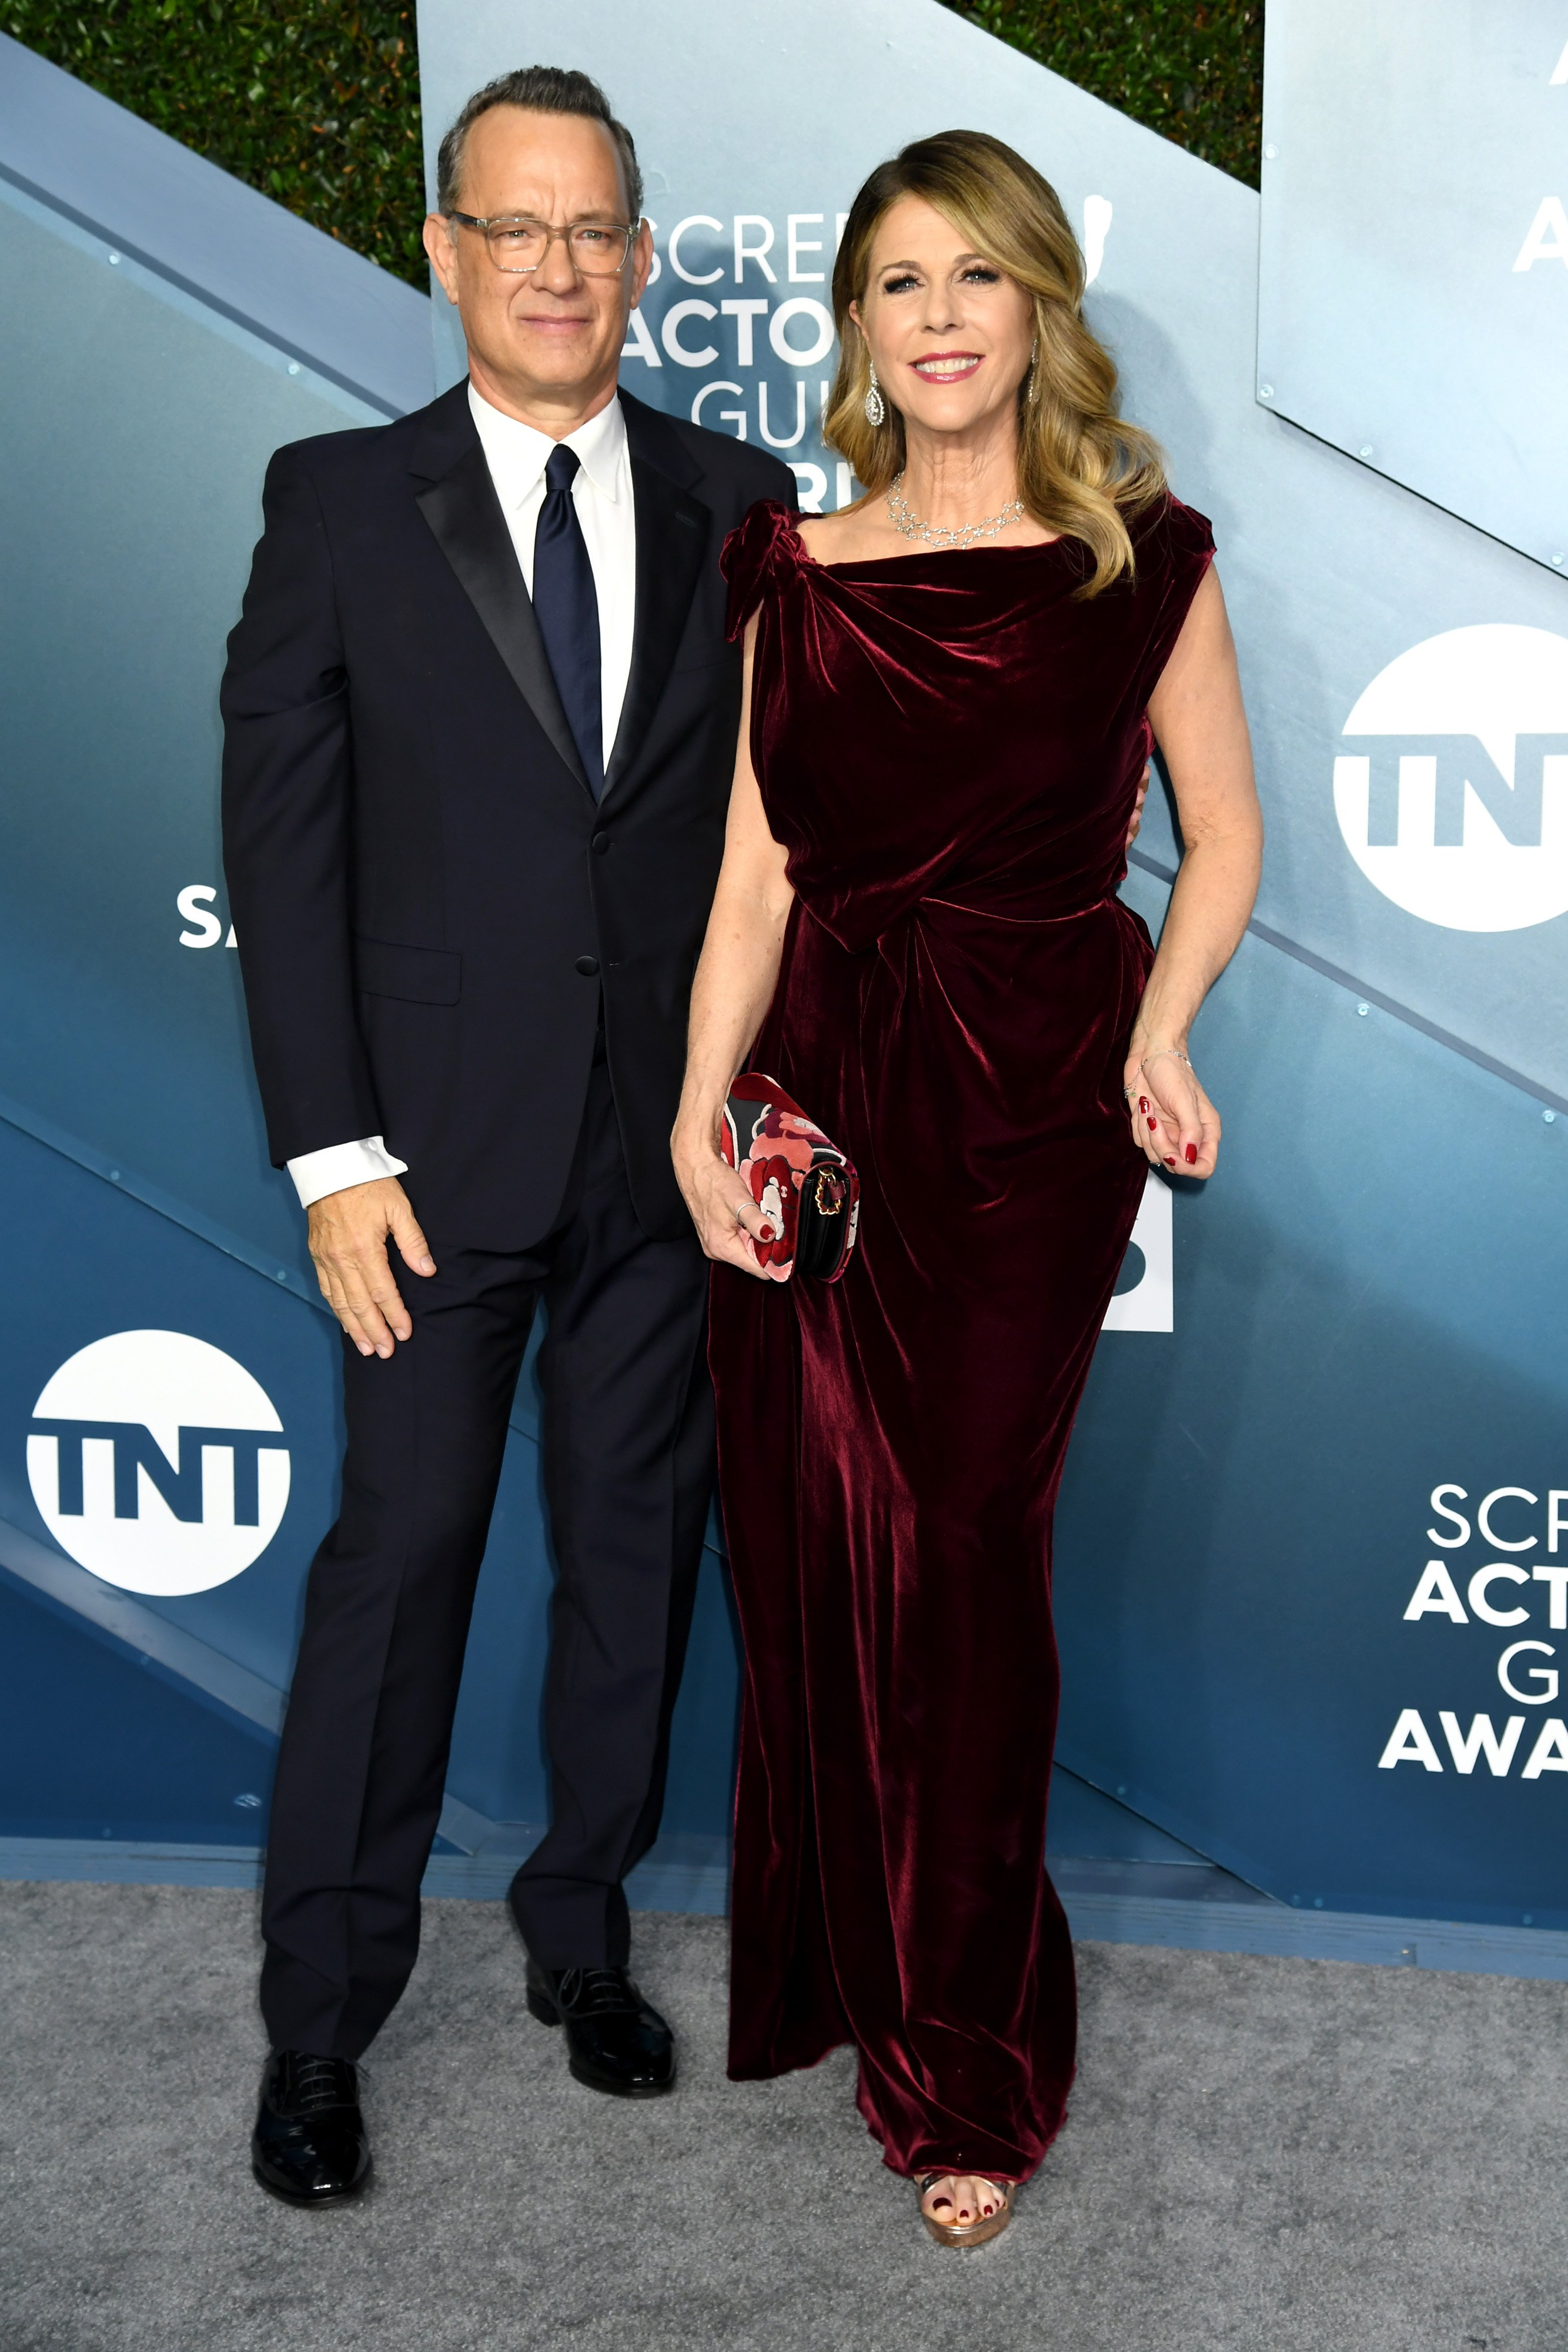 Tom Hanks and Rita Wilson at the 26th Annual Screen Actors Guild Awards on January 19, 2020, in Los Angeles | Photo: Getty Images